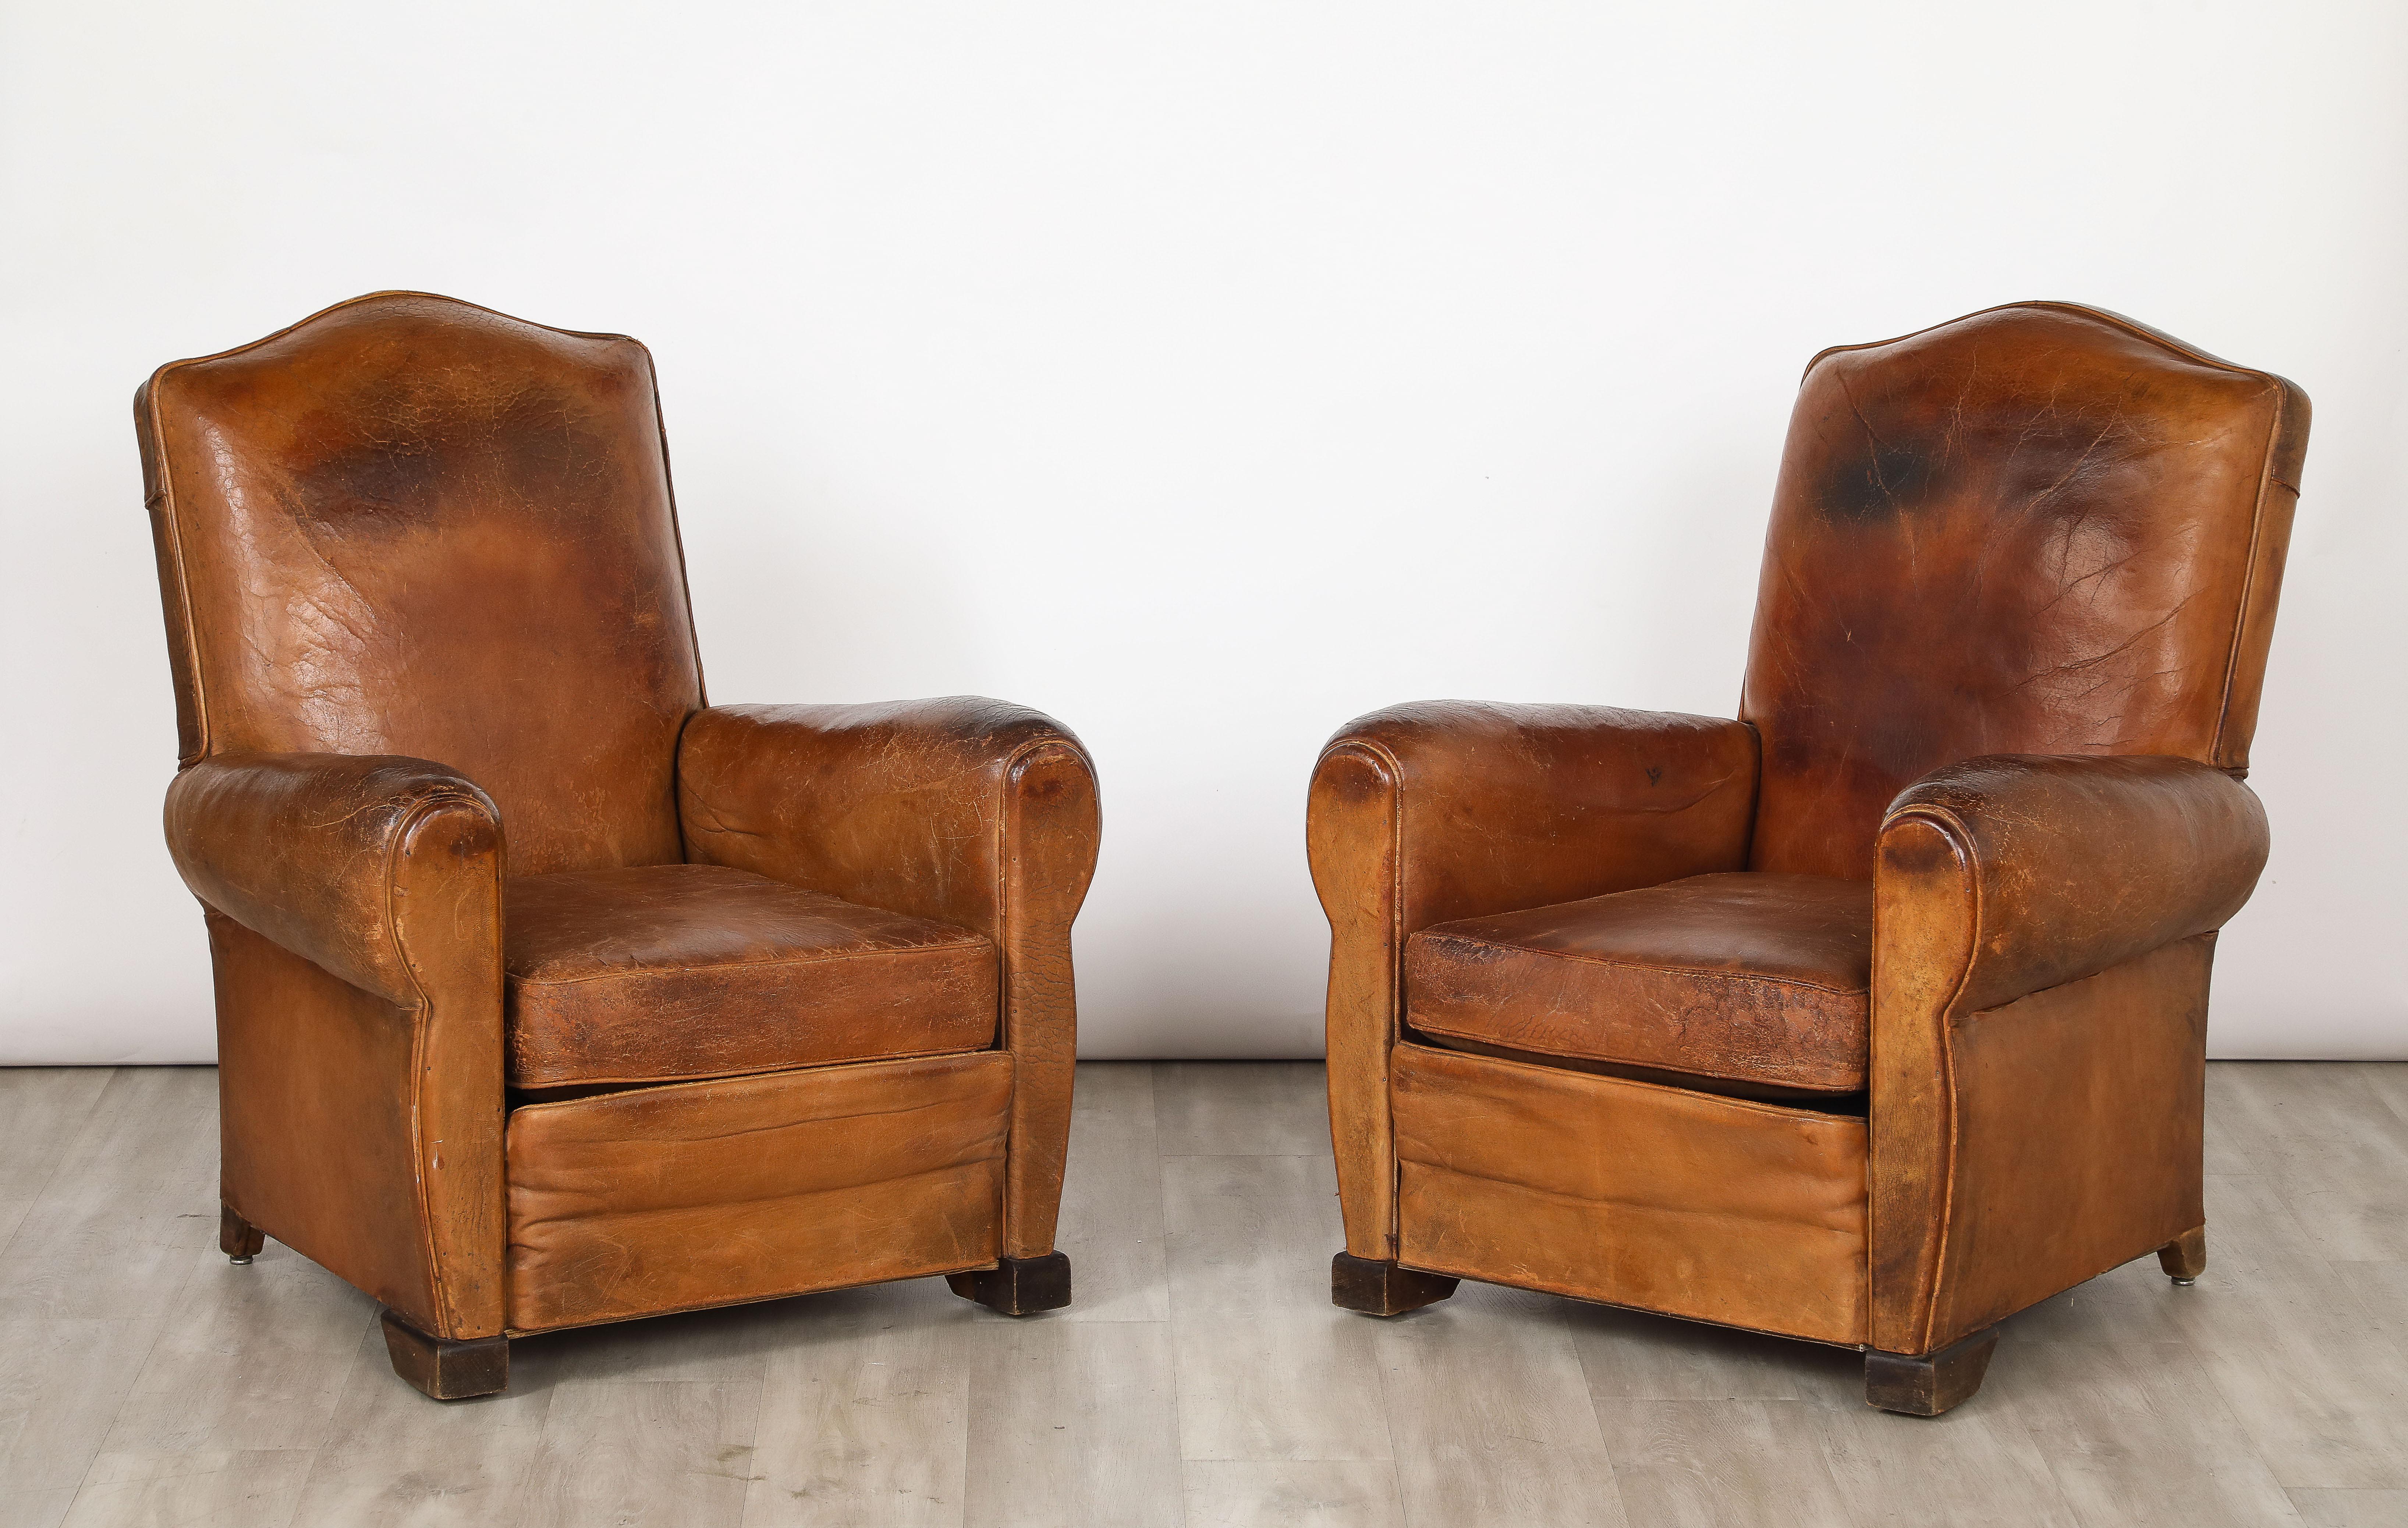 A magnificent pair of  French Art Deco leather club chairs dating from the 1930's with their original leather, the cushion with one side upholstered in a cocoa colored velvet.  The whole resting on block wood feet.  The original leather is soft and